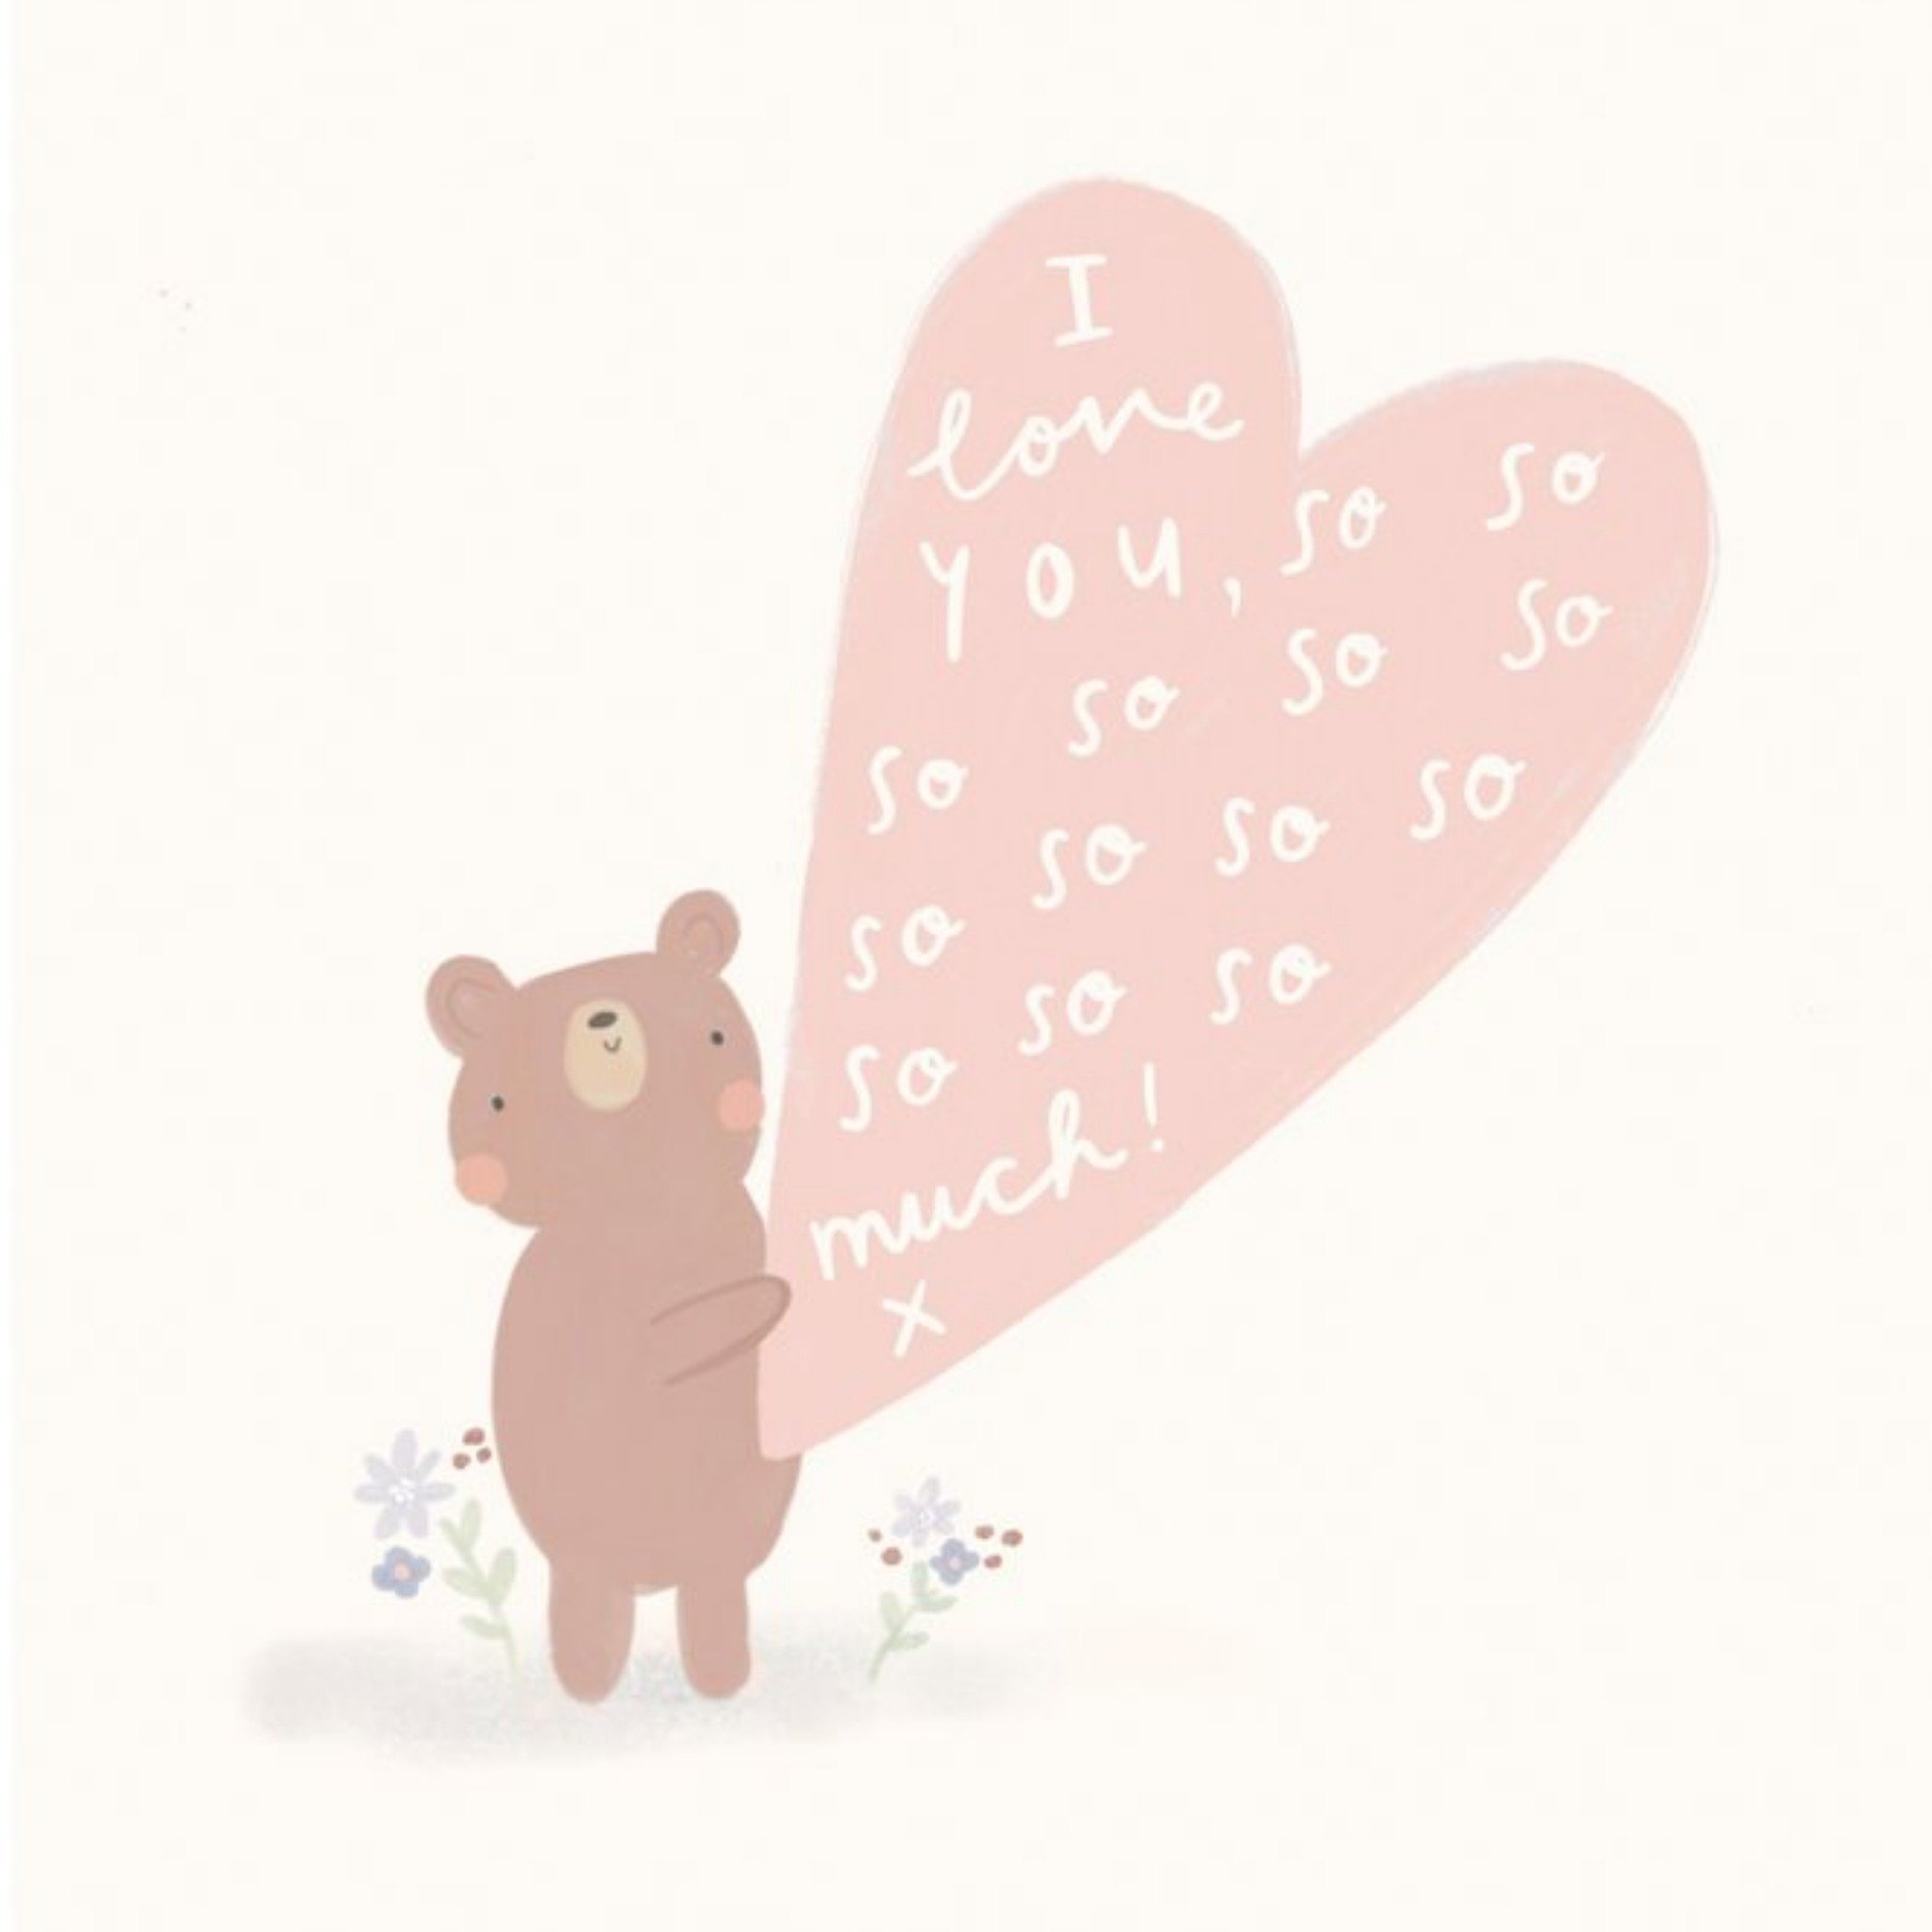 Moonpig Illustration Of A Bear Holding A Heart With A Message Thinking Of You Card, Large